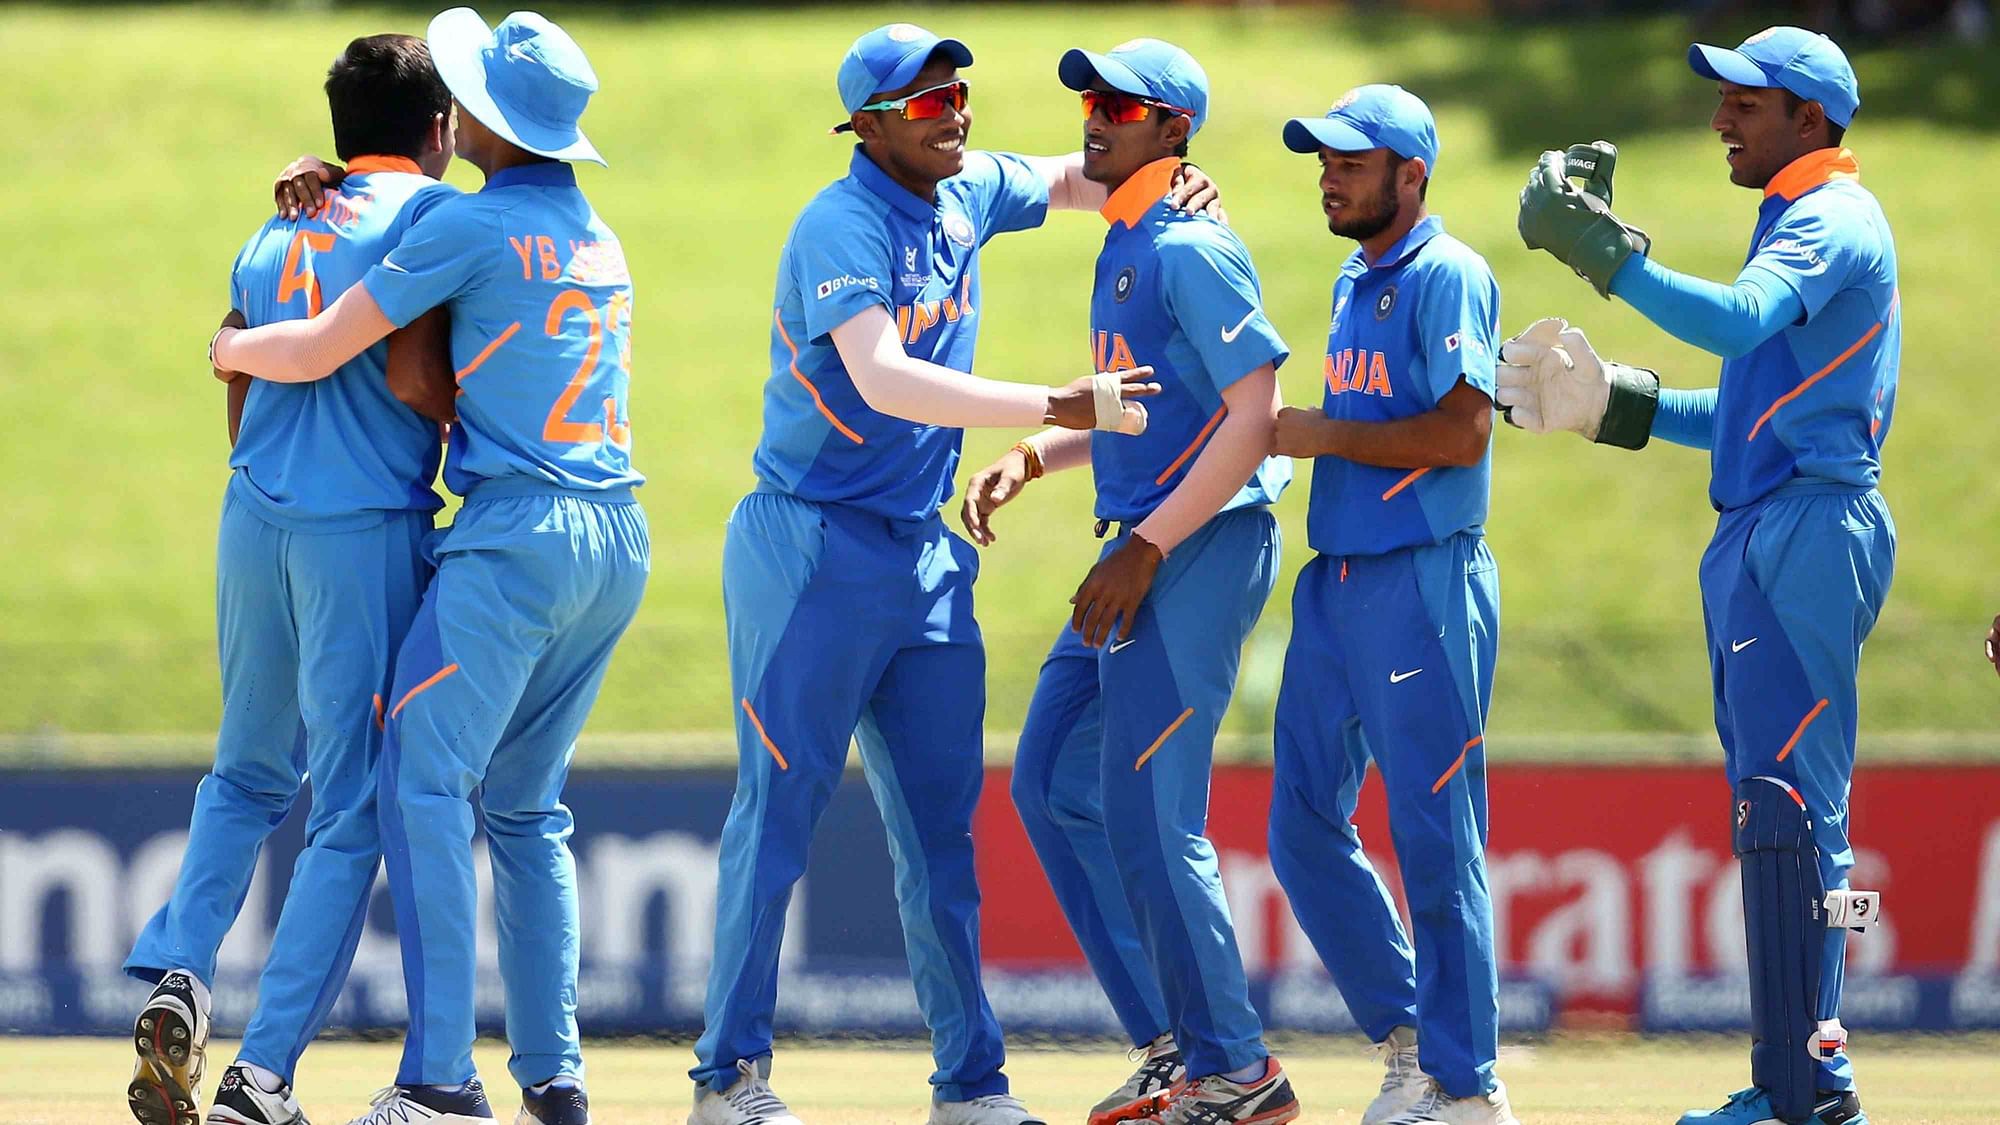 The Under-19 Indian team has been unbeaten throughout the World Cup.